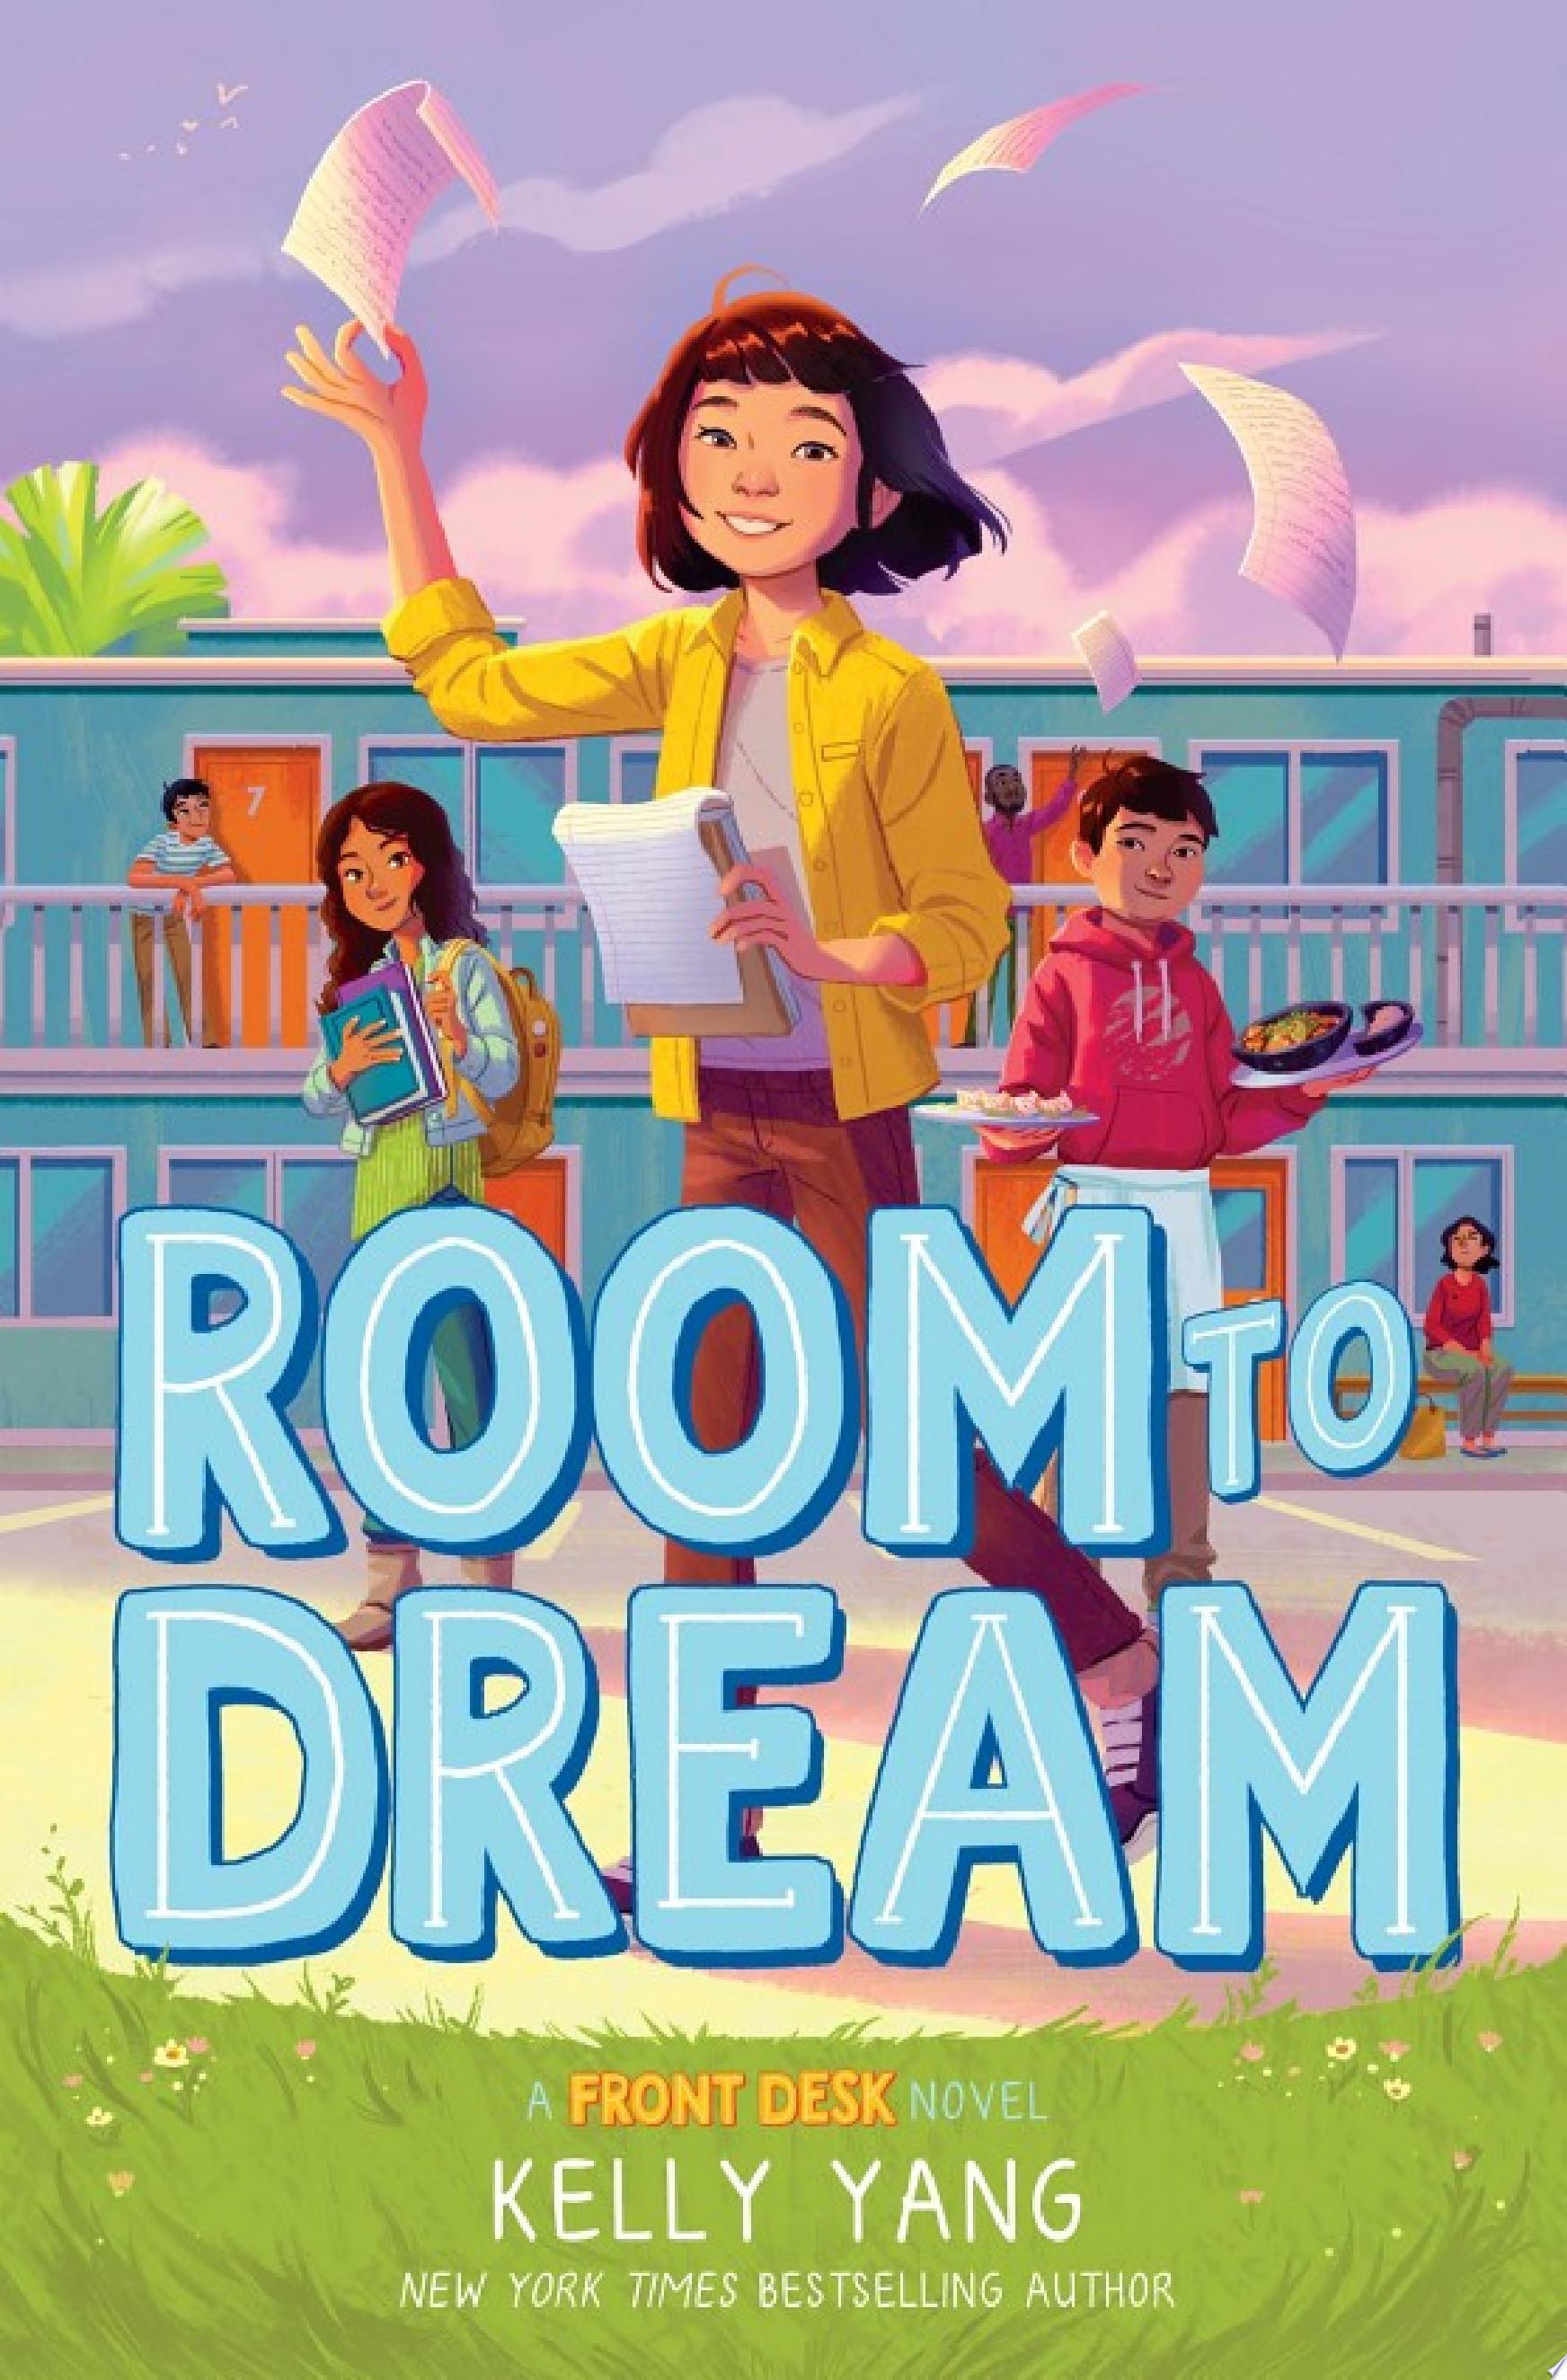 Image for "Room to Dream"